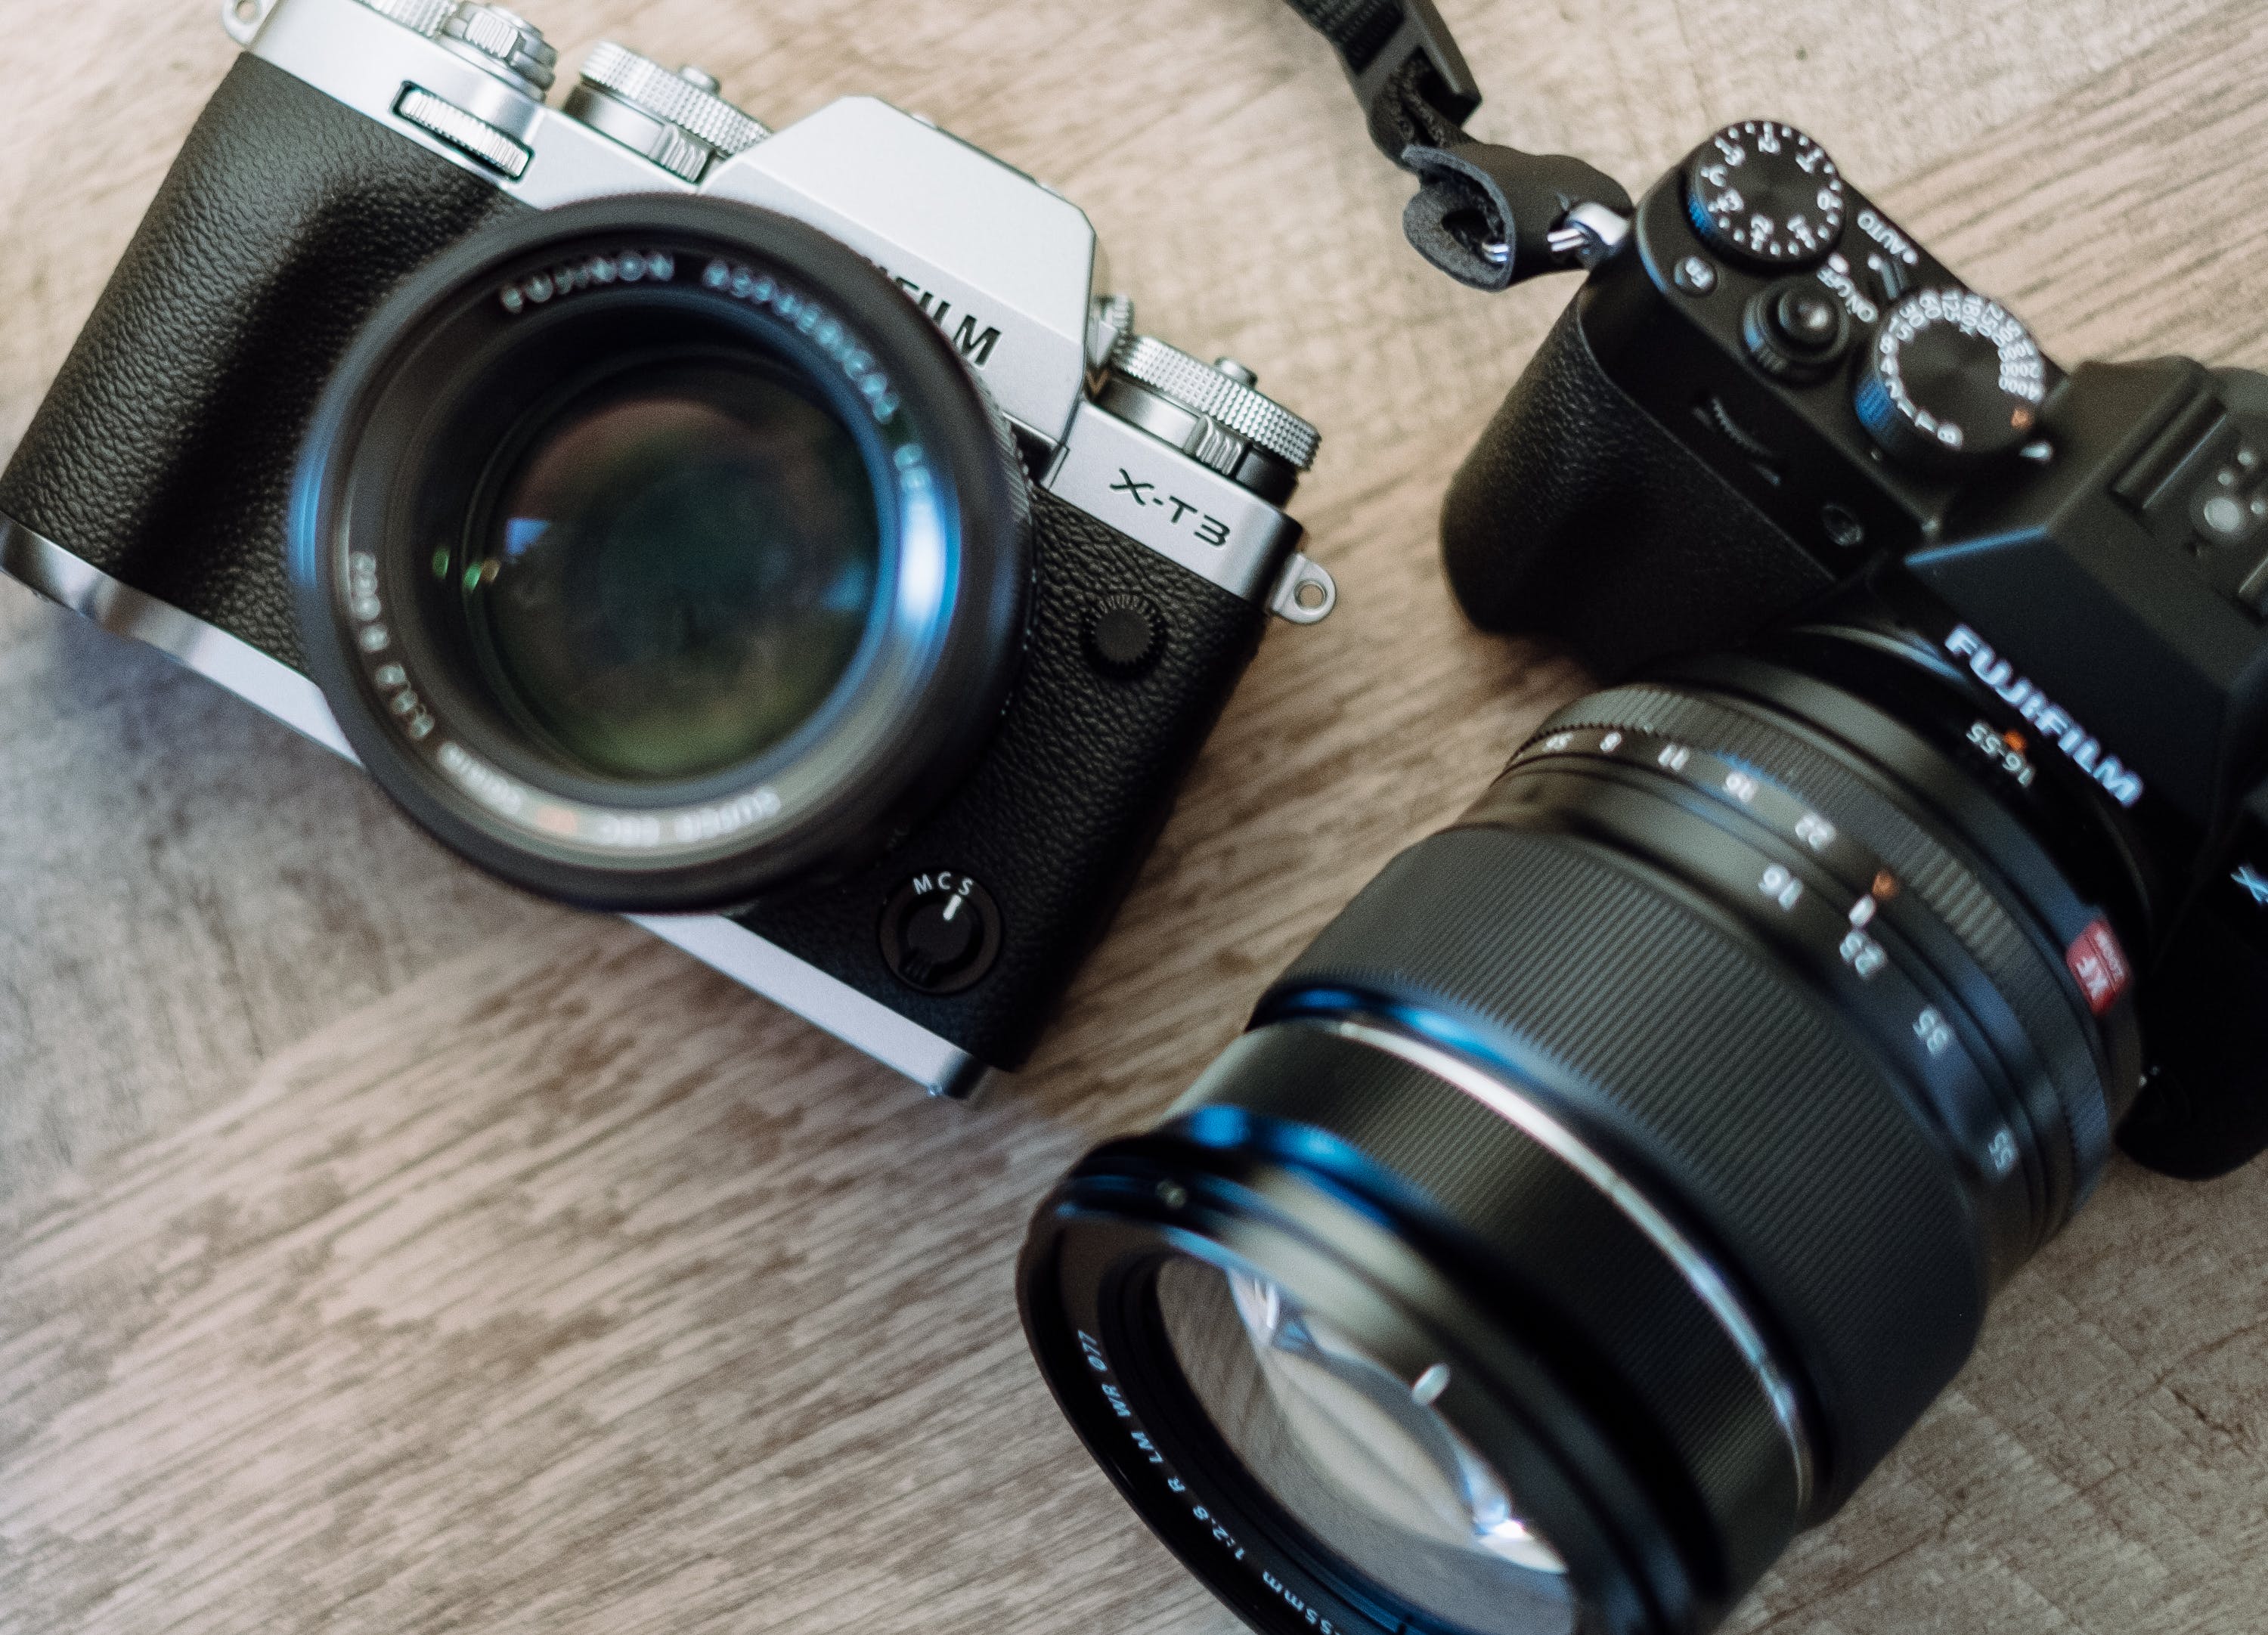 The Top 10 Retro-Style Cameras You Can Buy